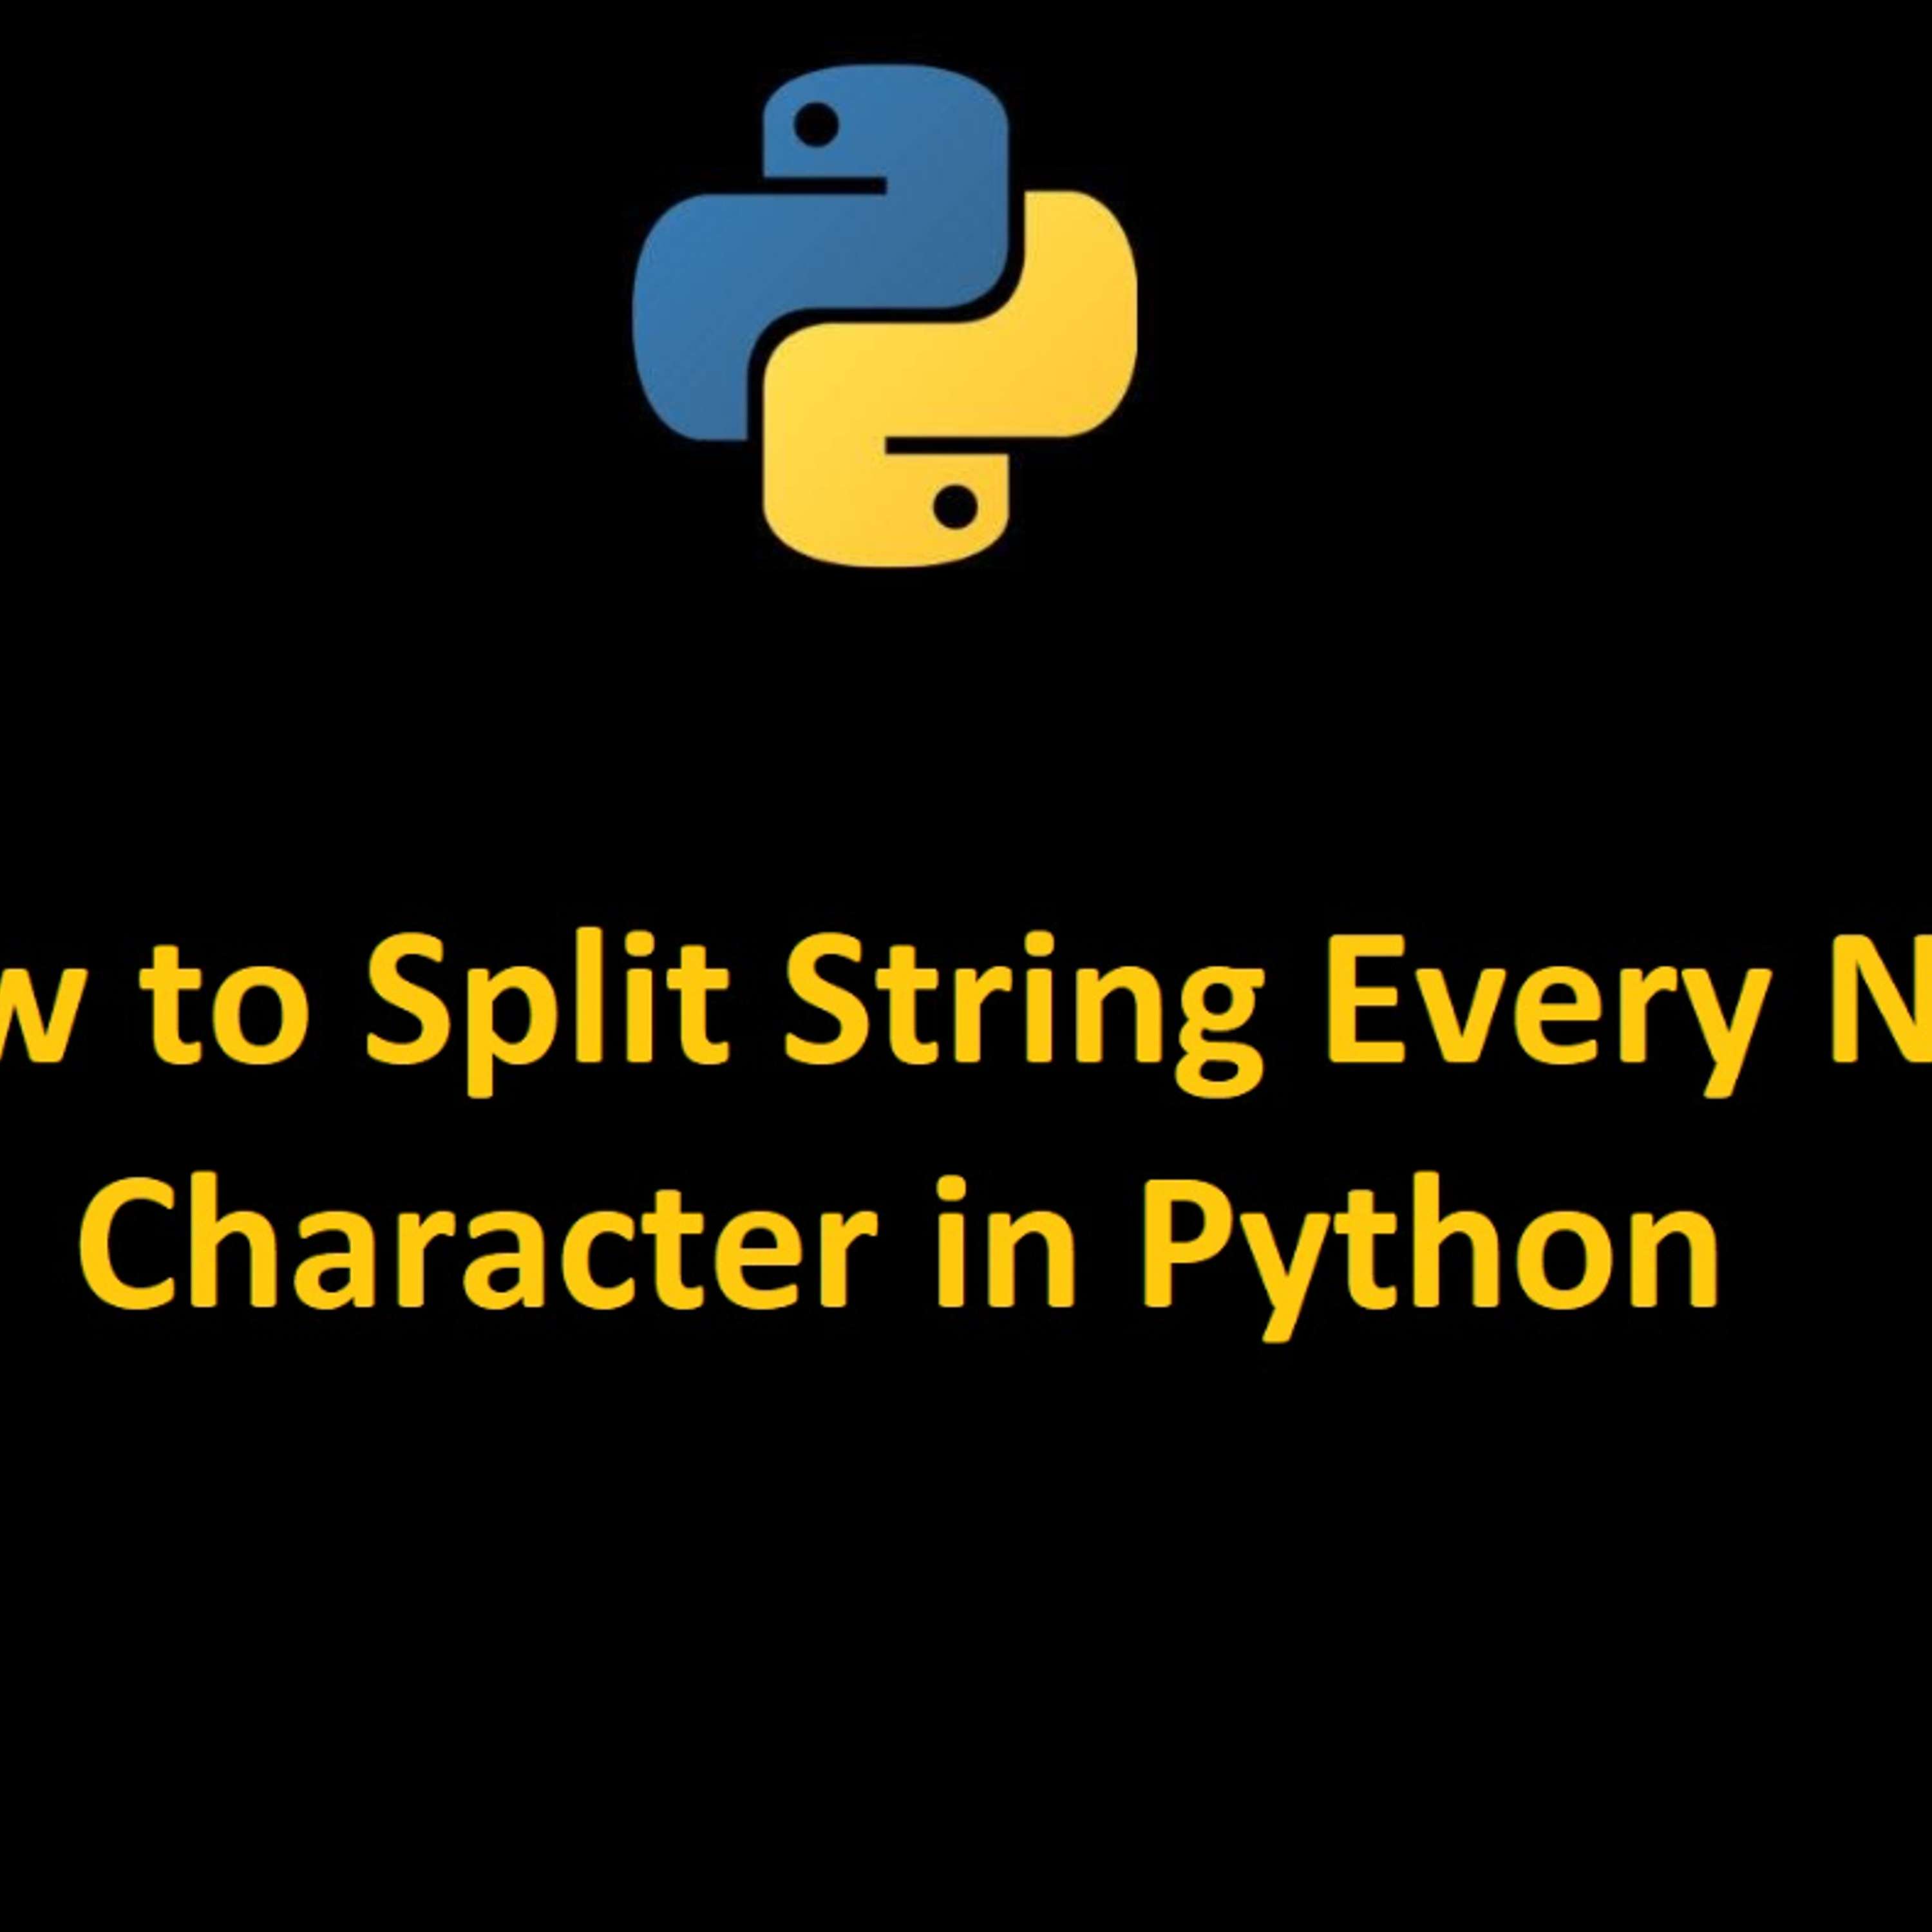 How to Split String Every Nth Character in Python